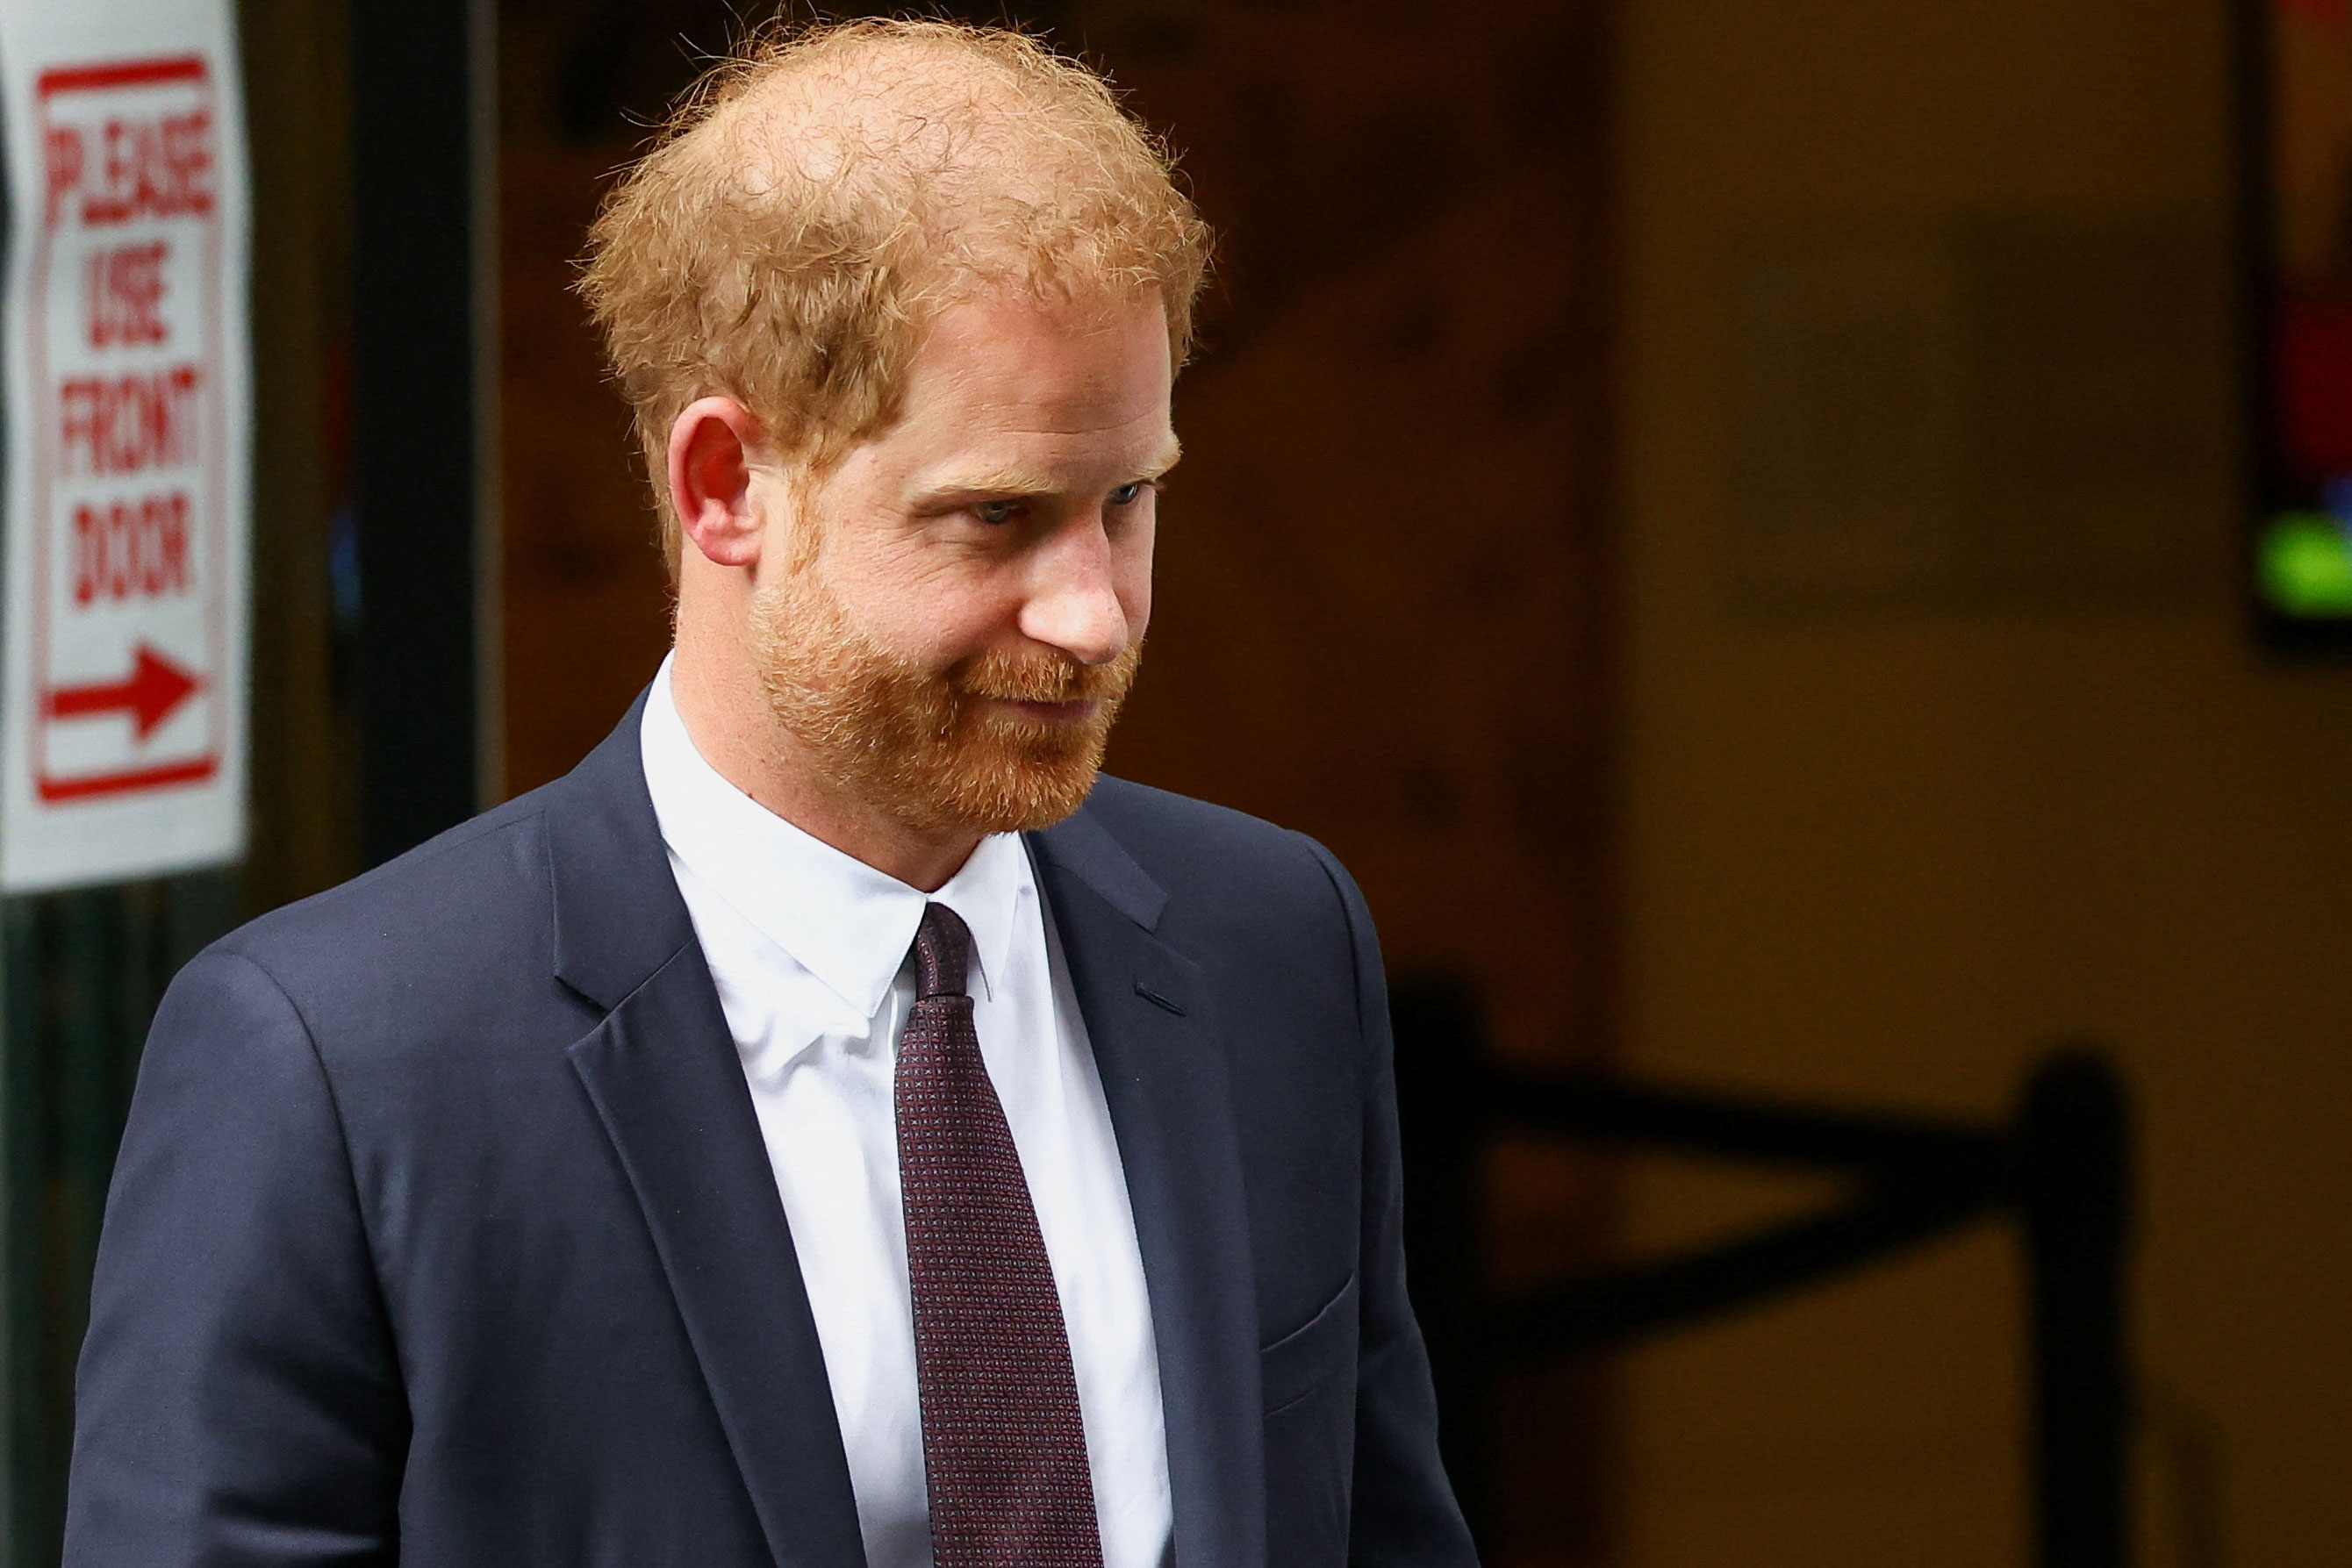 Prince Harry leaves the Rolls Building of the High Court in London on Tuesday.